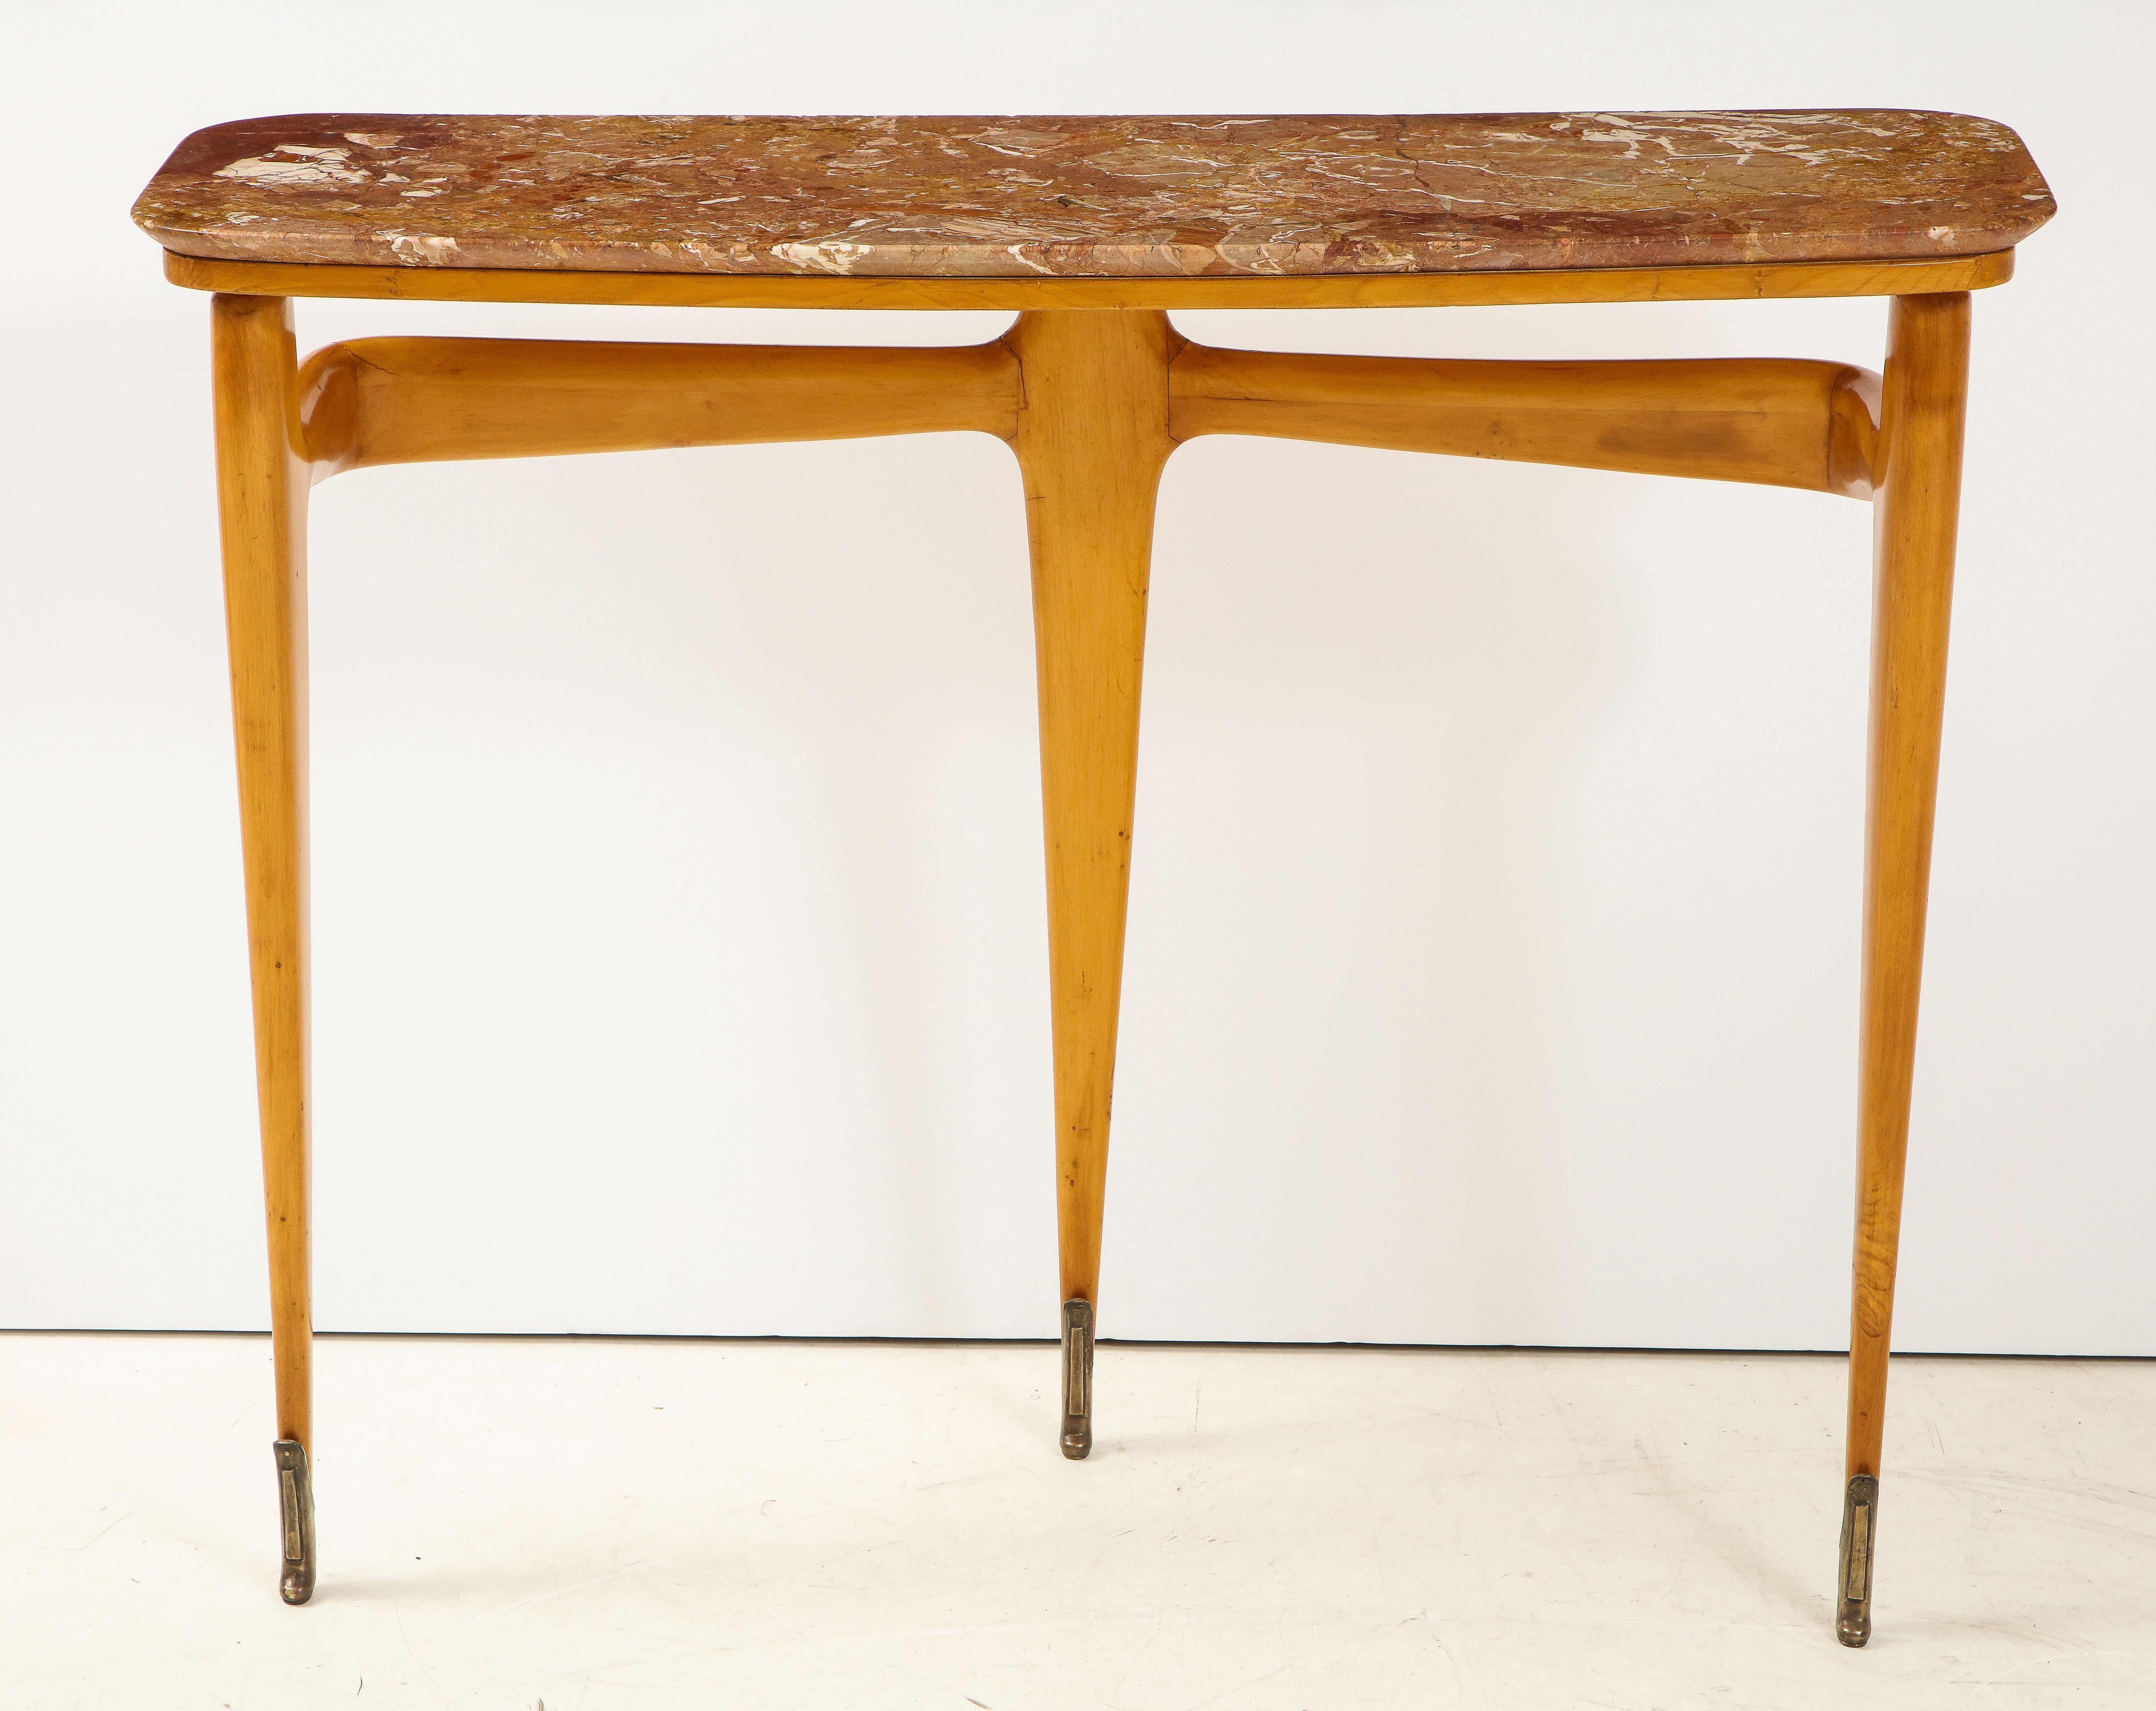 Beautifully shaped maple wood console table with Breccia marble top supported by tripod stunning tapered legs ending in elegant brass sabot. The three legs joined on the back side by a horizontal shaped wood stretcher. The wood warm and golden